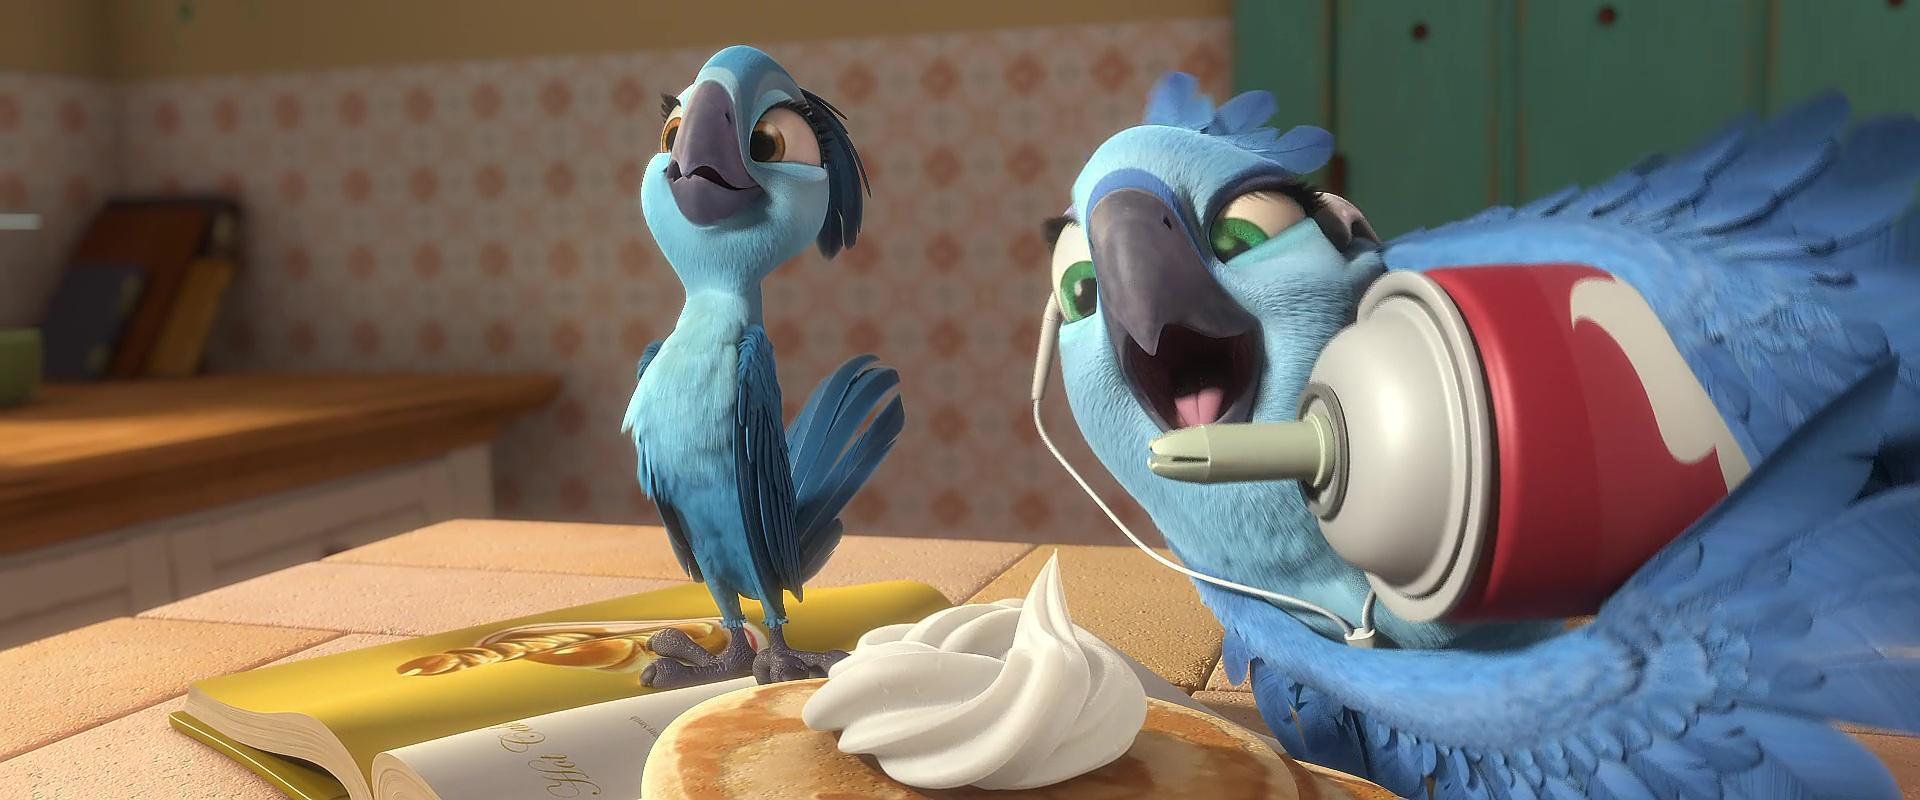 Image gallery for Rio 2.